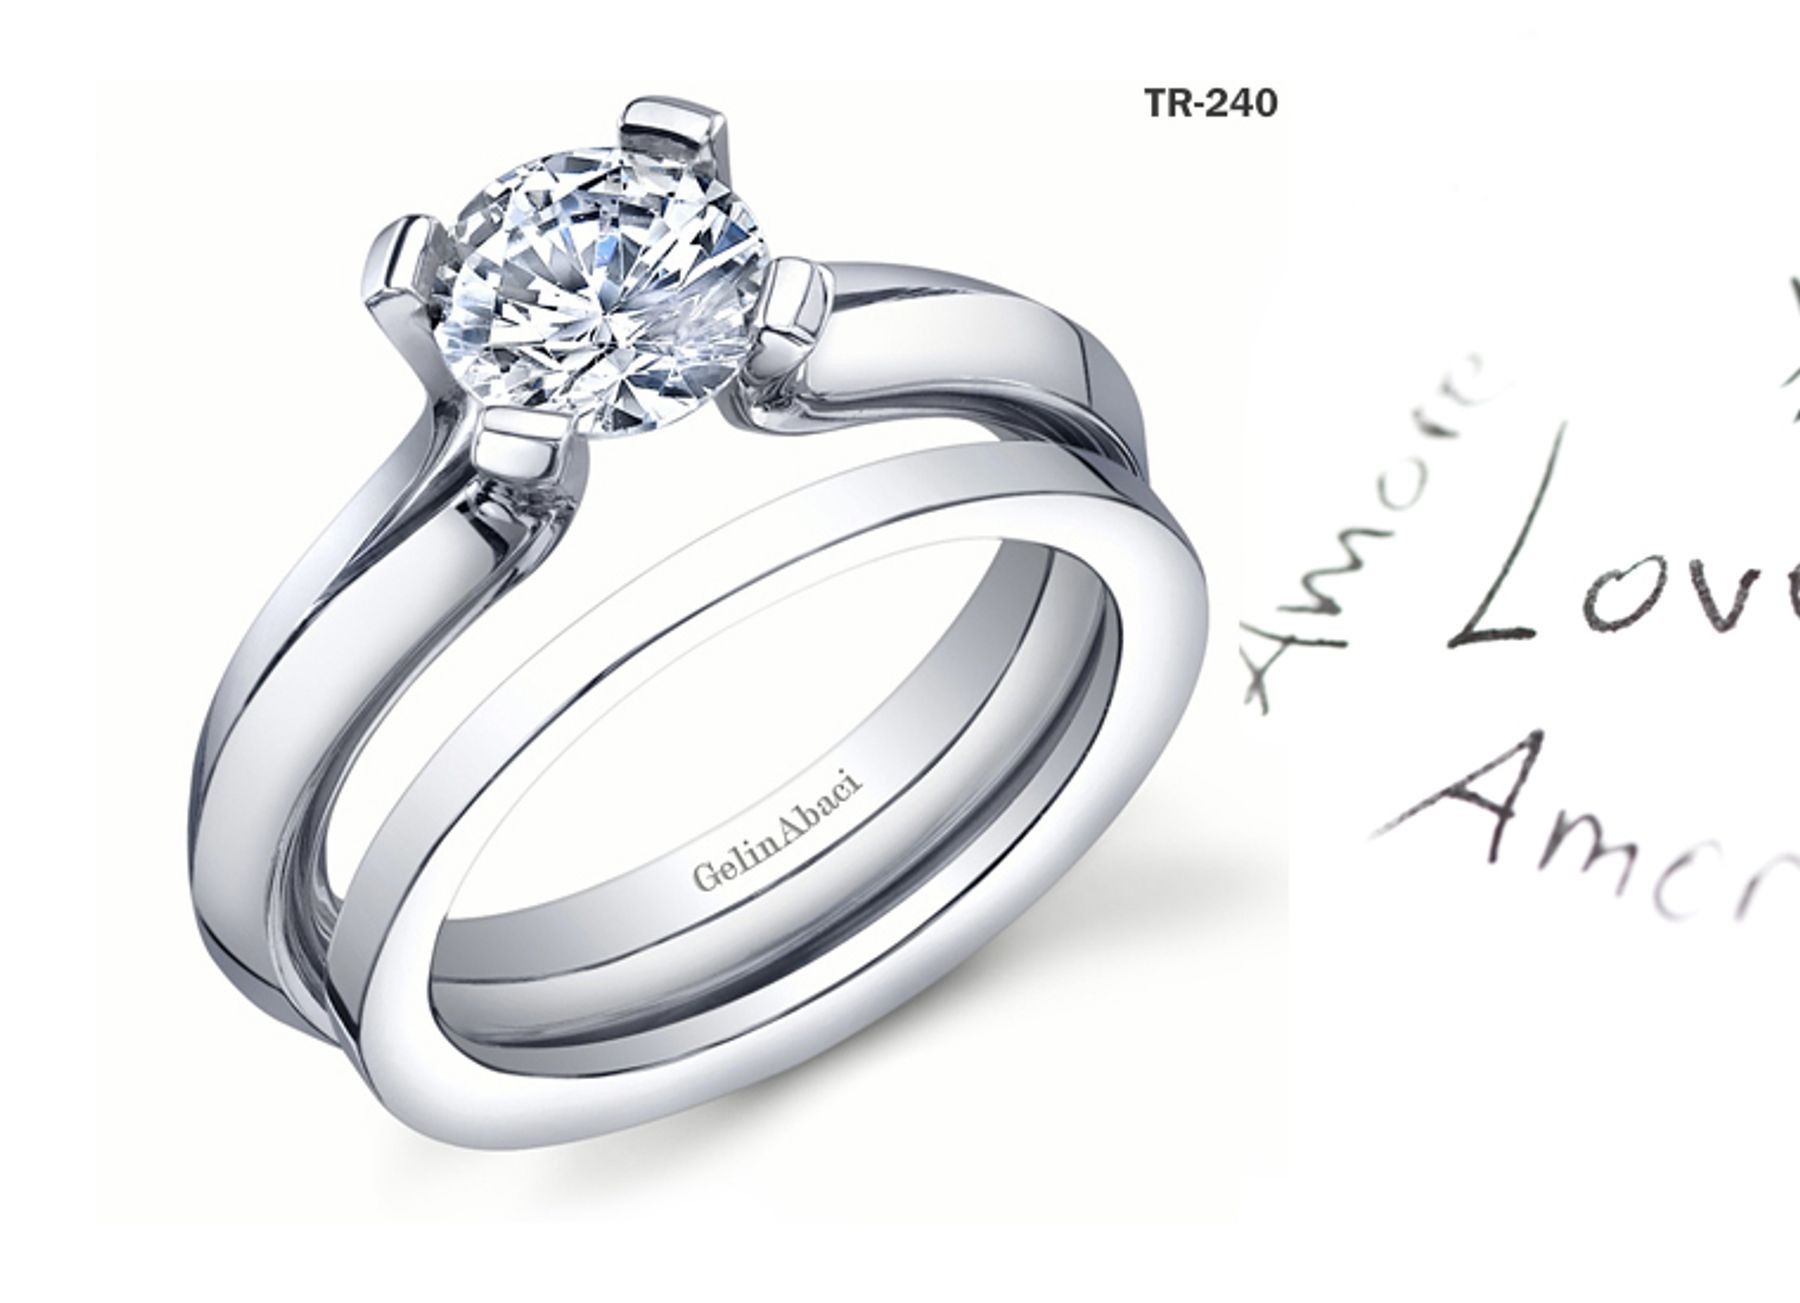 Exclusive Designs: Modern Tension Set Rings With Center Diamond 0.50 to 2.0 Carat Weight